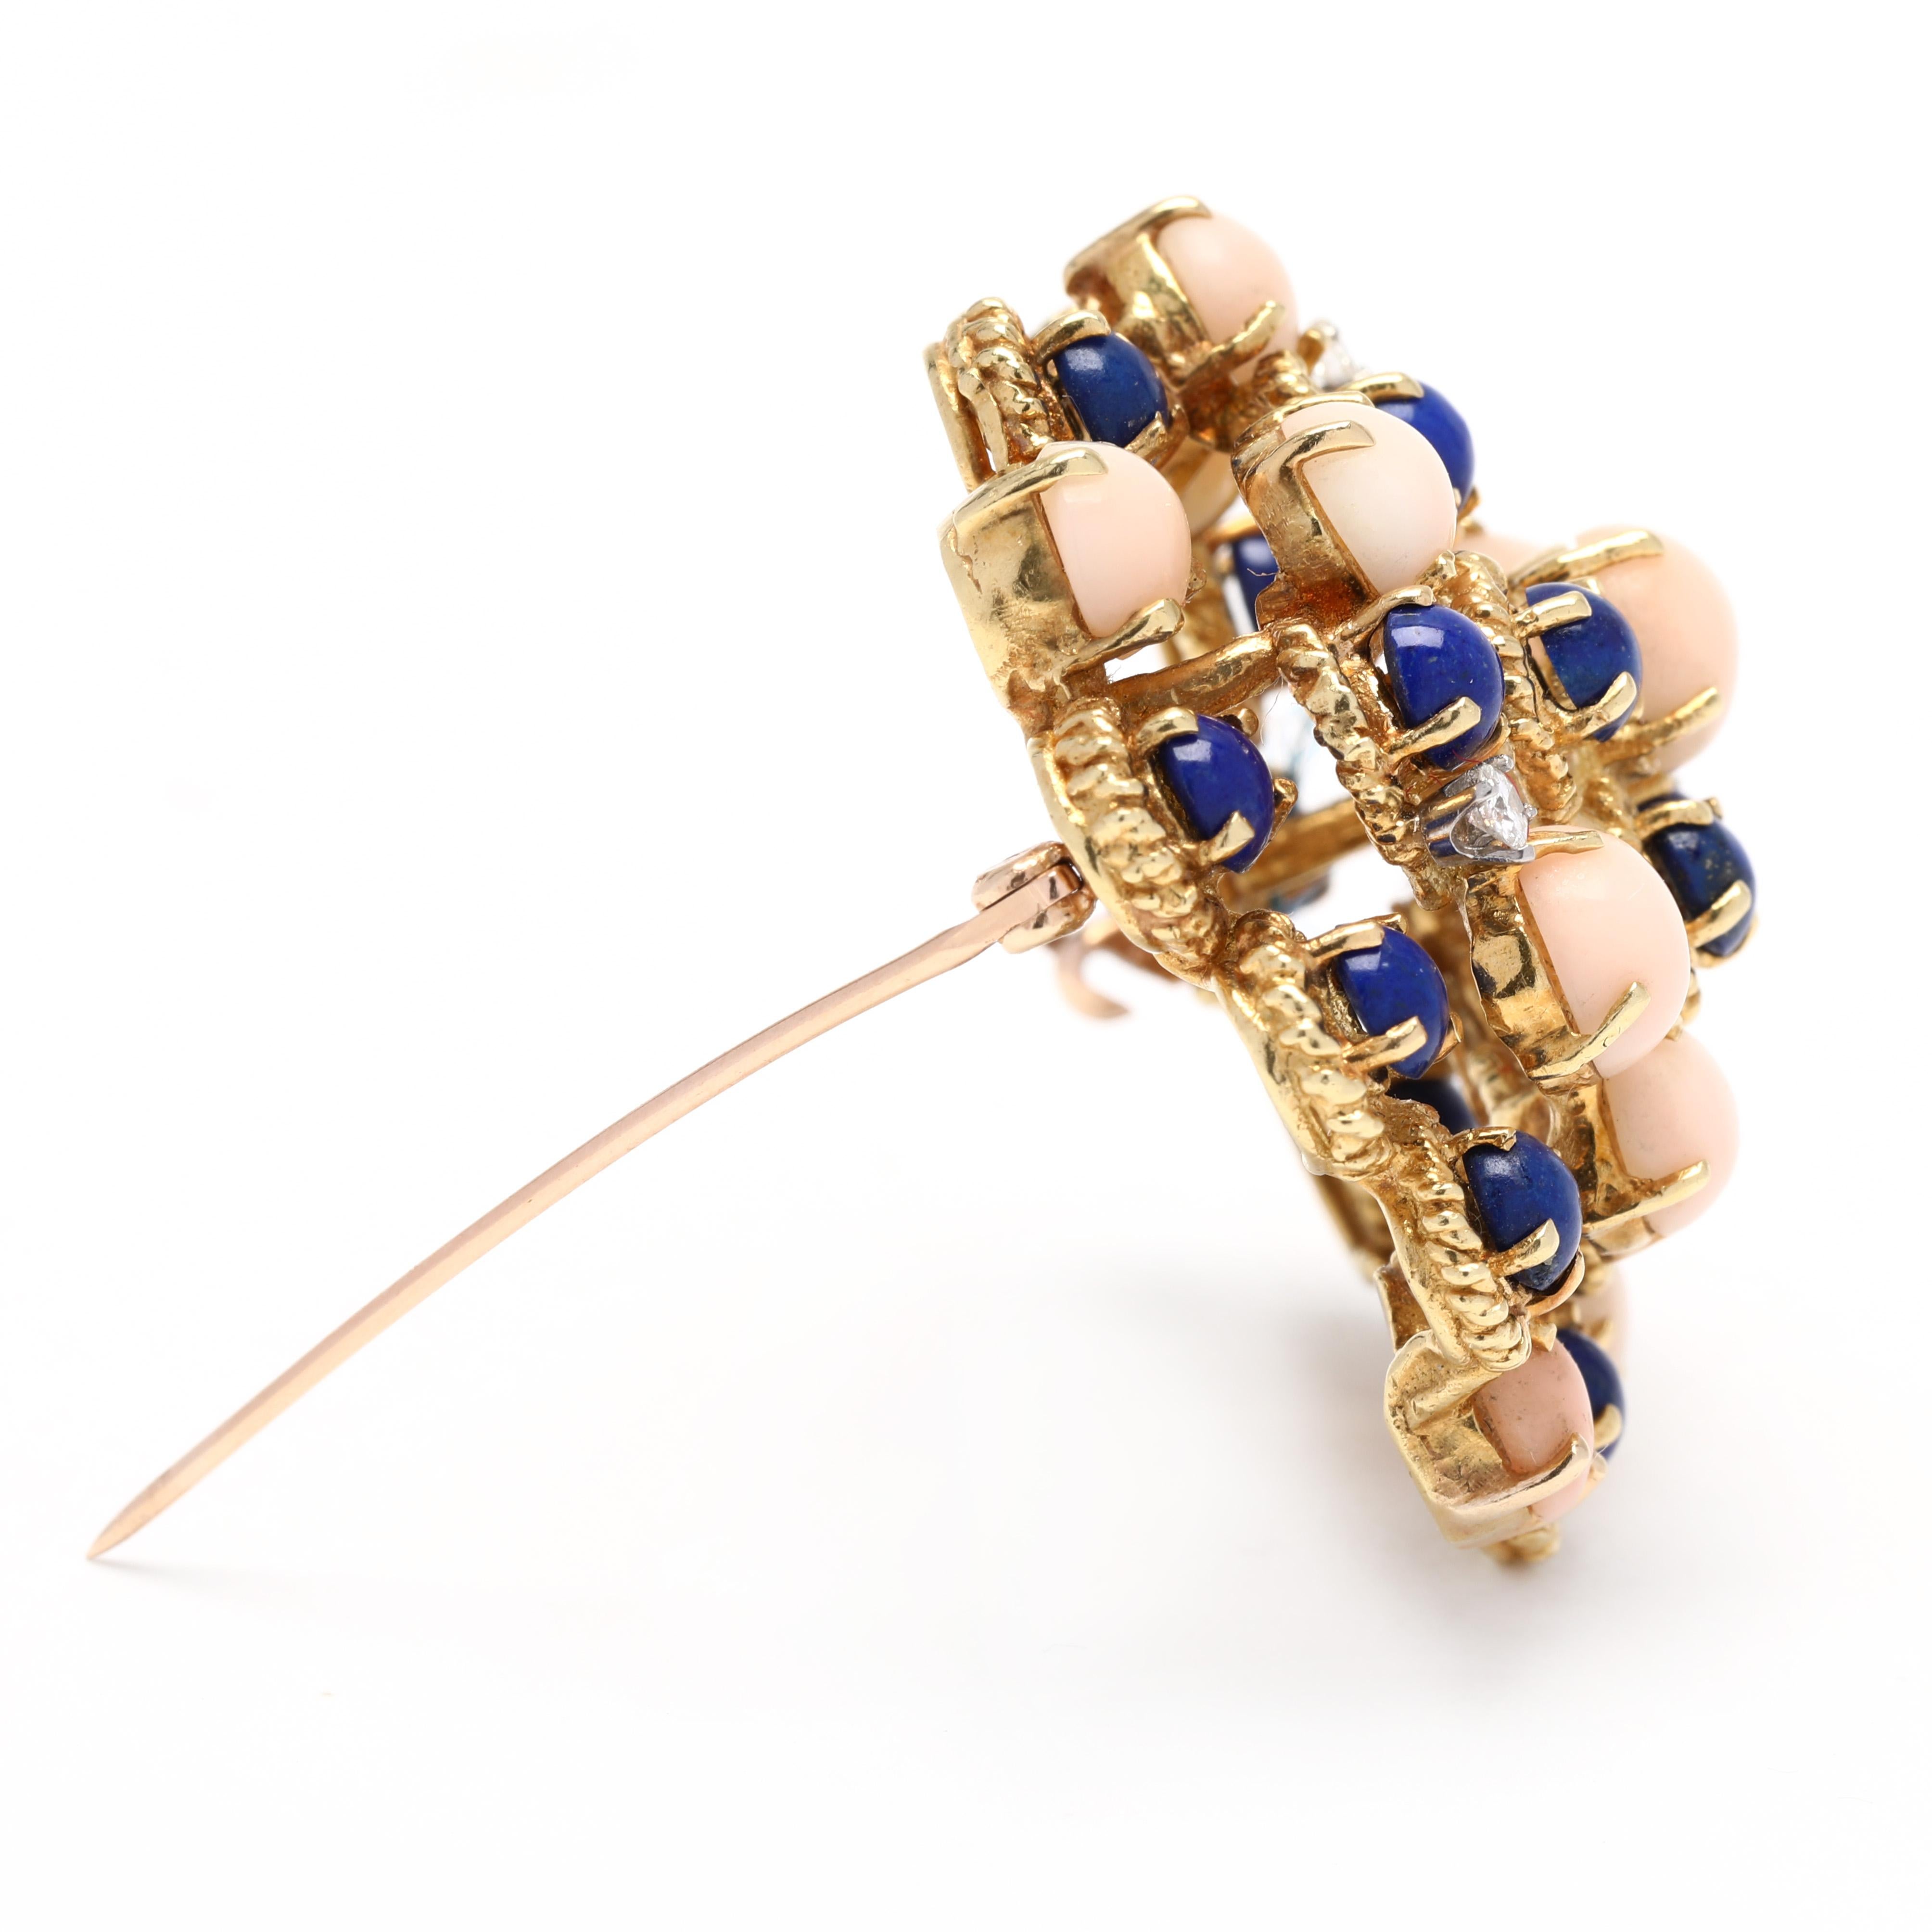 This one-of-a-kind 0.12ctw diamond, coral and lapis signed brooch features 18K yellow gold. Crafted with expert attention to detail, this large gemstone brooch sparkles with a unique luminosity. Perfectly sized to draw attention to the face and